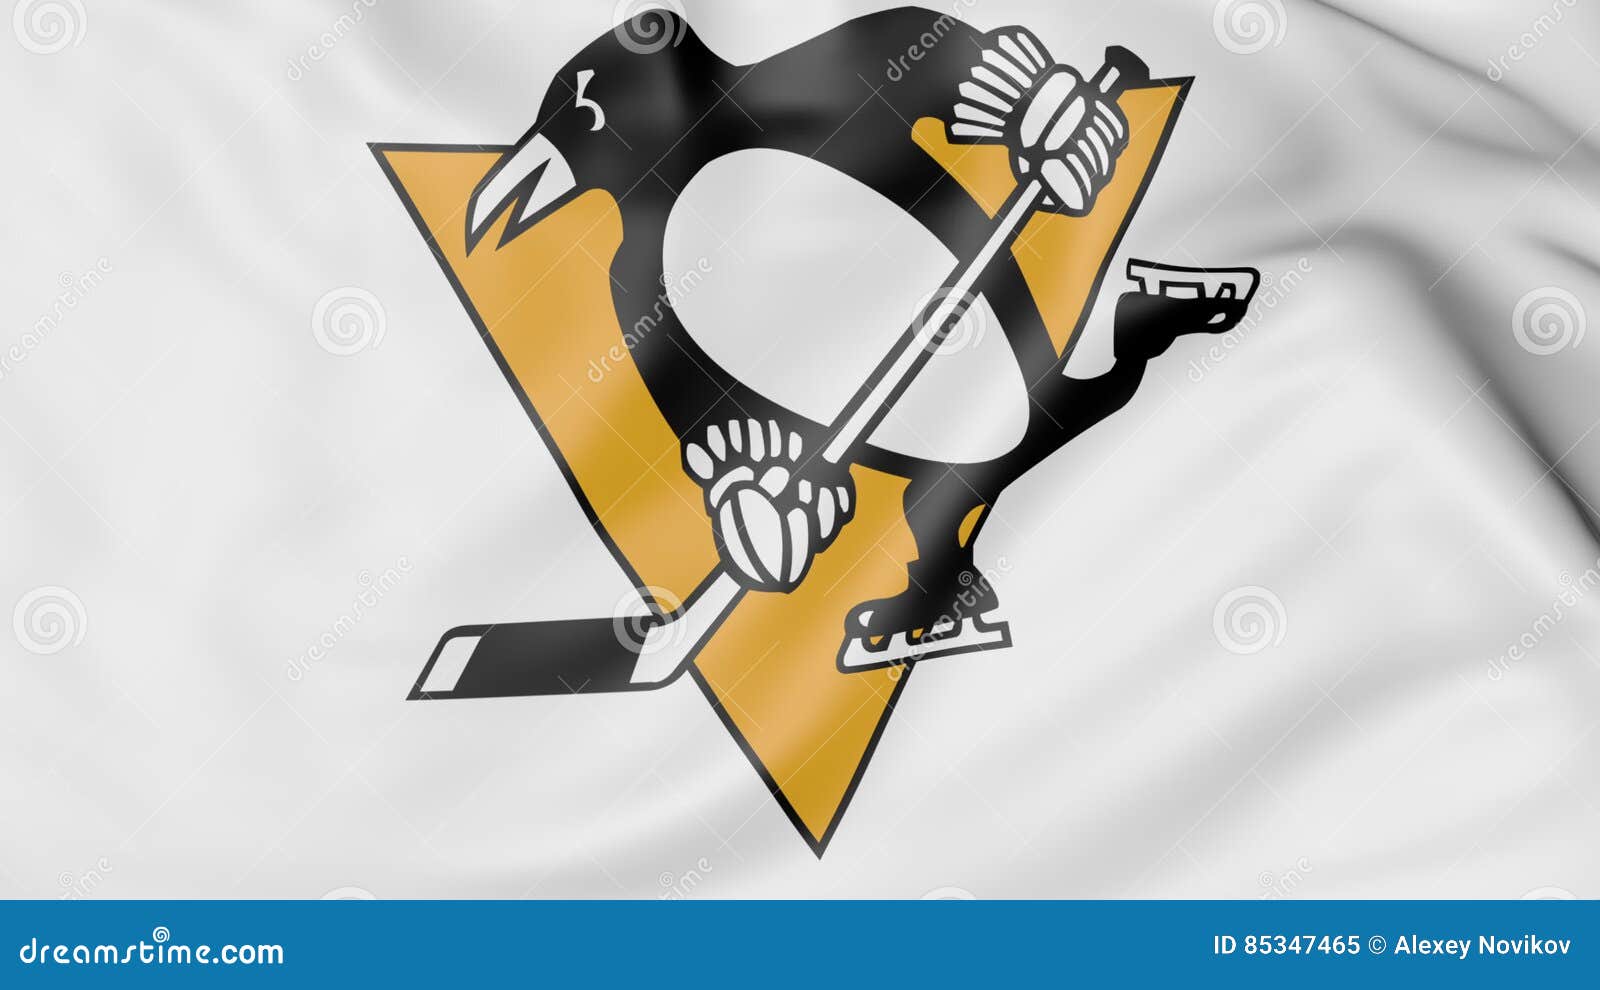 116 Penguins Hockey Stock Illustrations, Vectors and Clipart